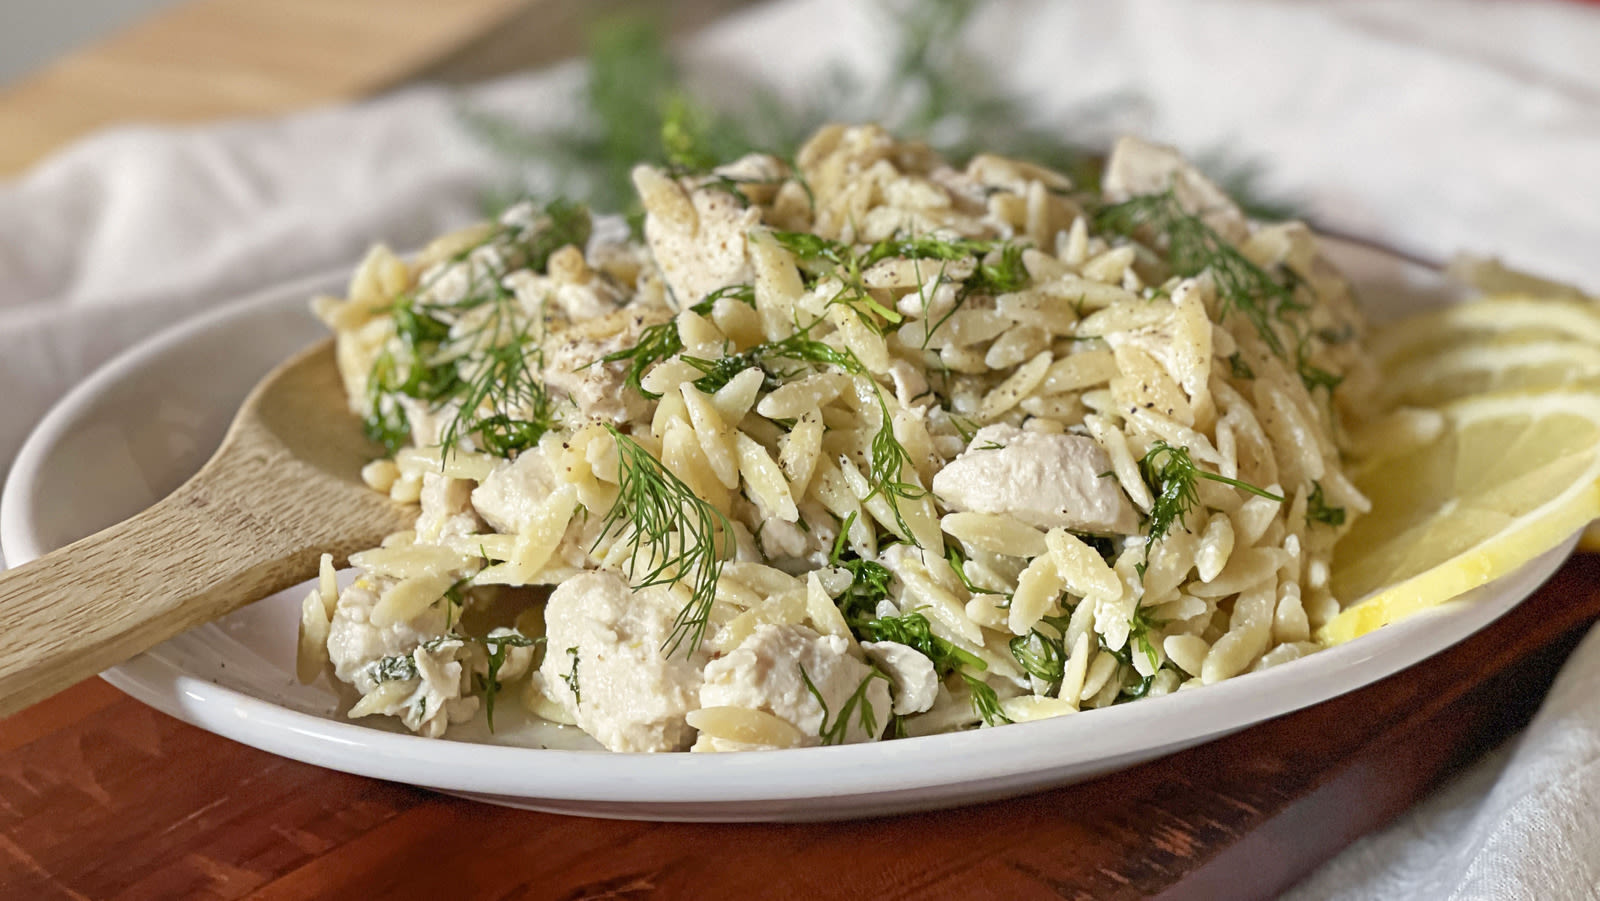 Chicken Orzo Salad With Lemon And Dill Recipe